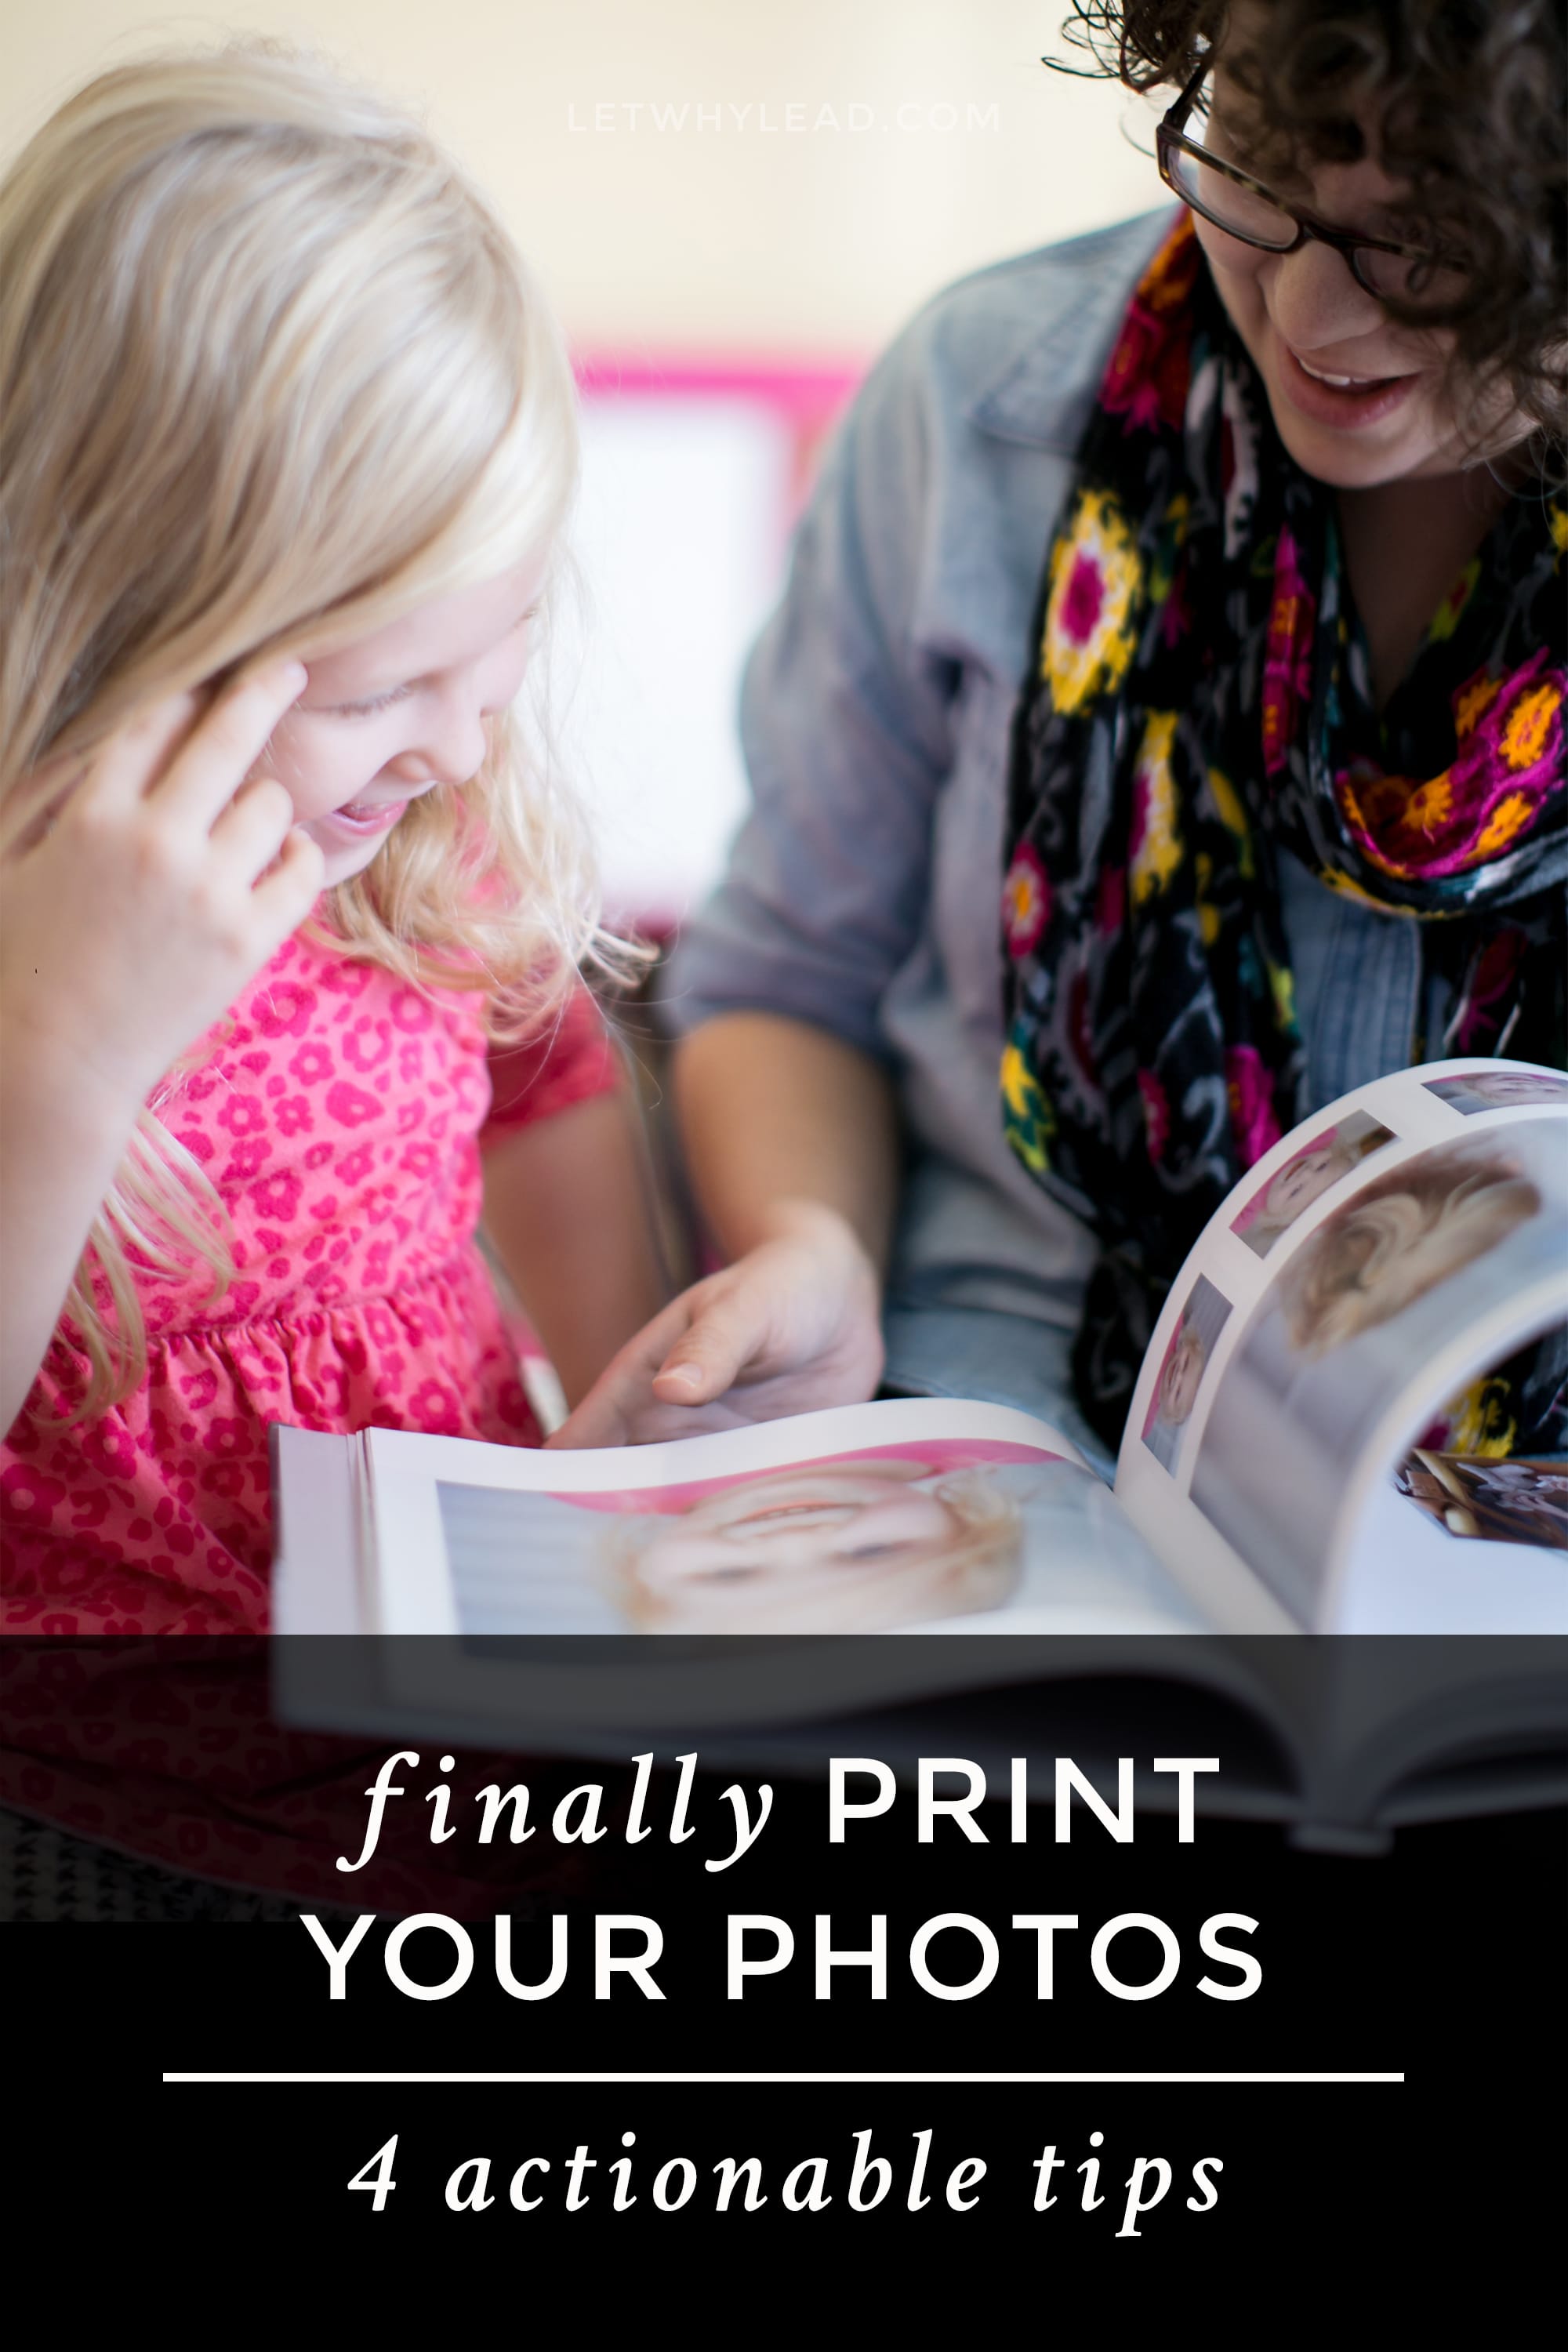 Printed photos bottle up happy feelings and allow us direct access to those emotions when we need them most. | 4 tips to help you FINALLY print your photos!